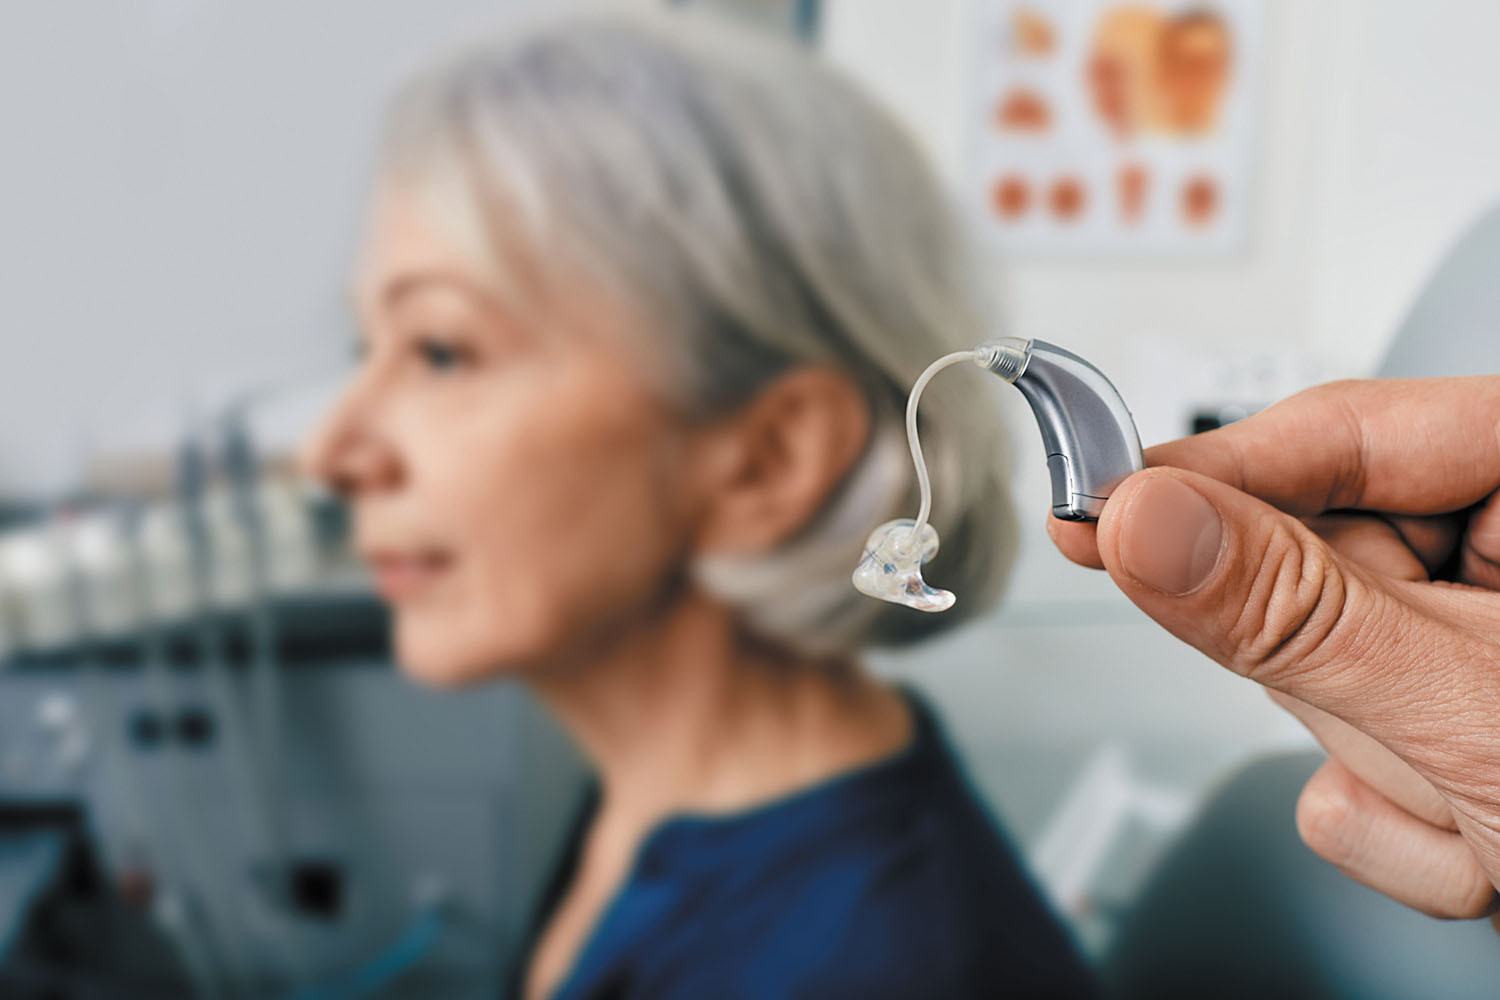 photo of a hand holding a hearing aid in front of a woman slightly out of focus in the background